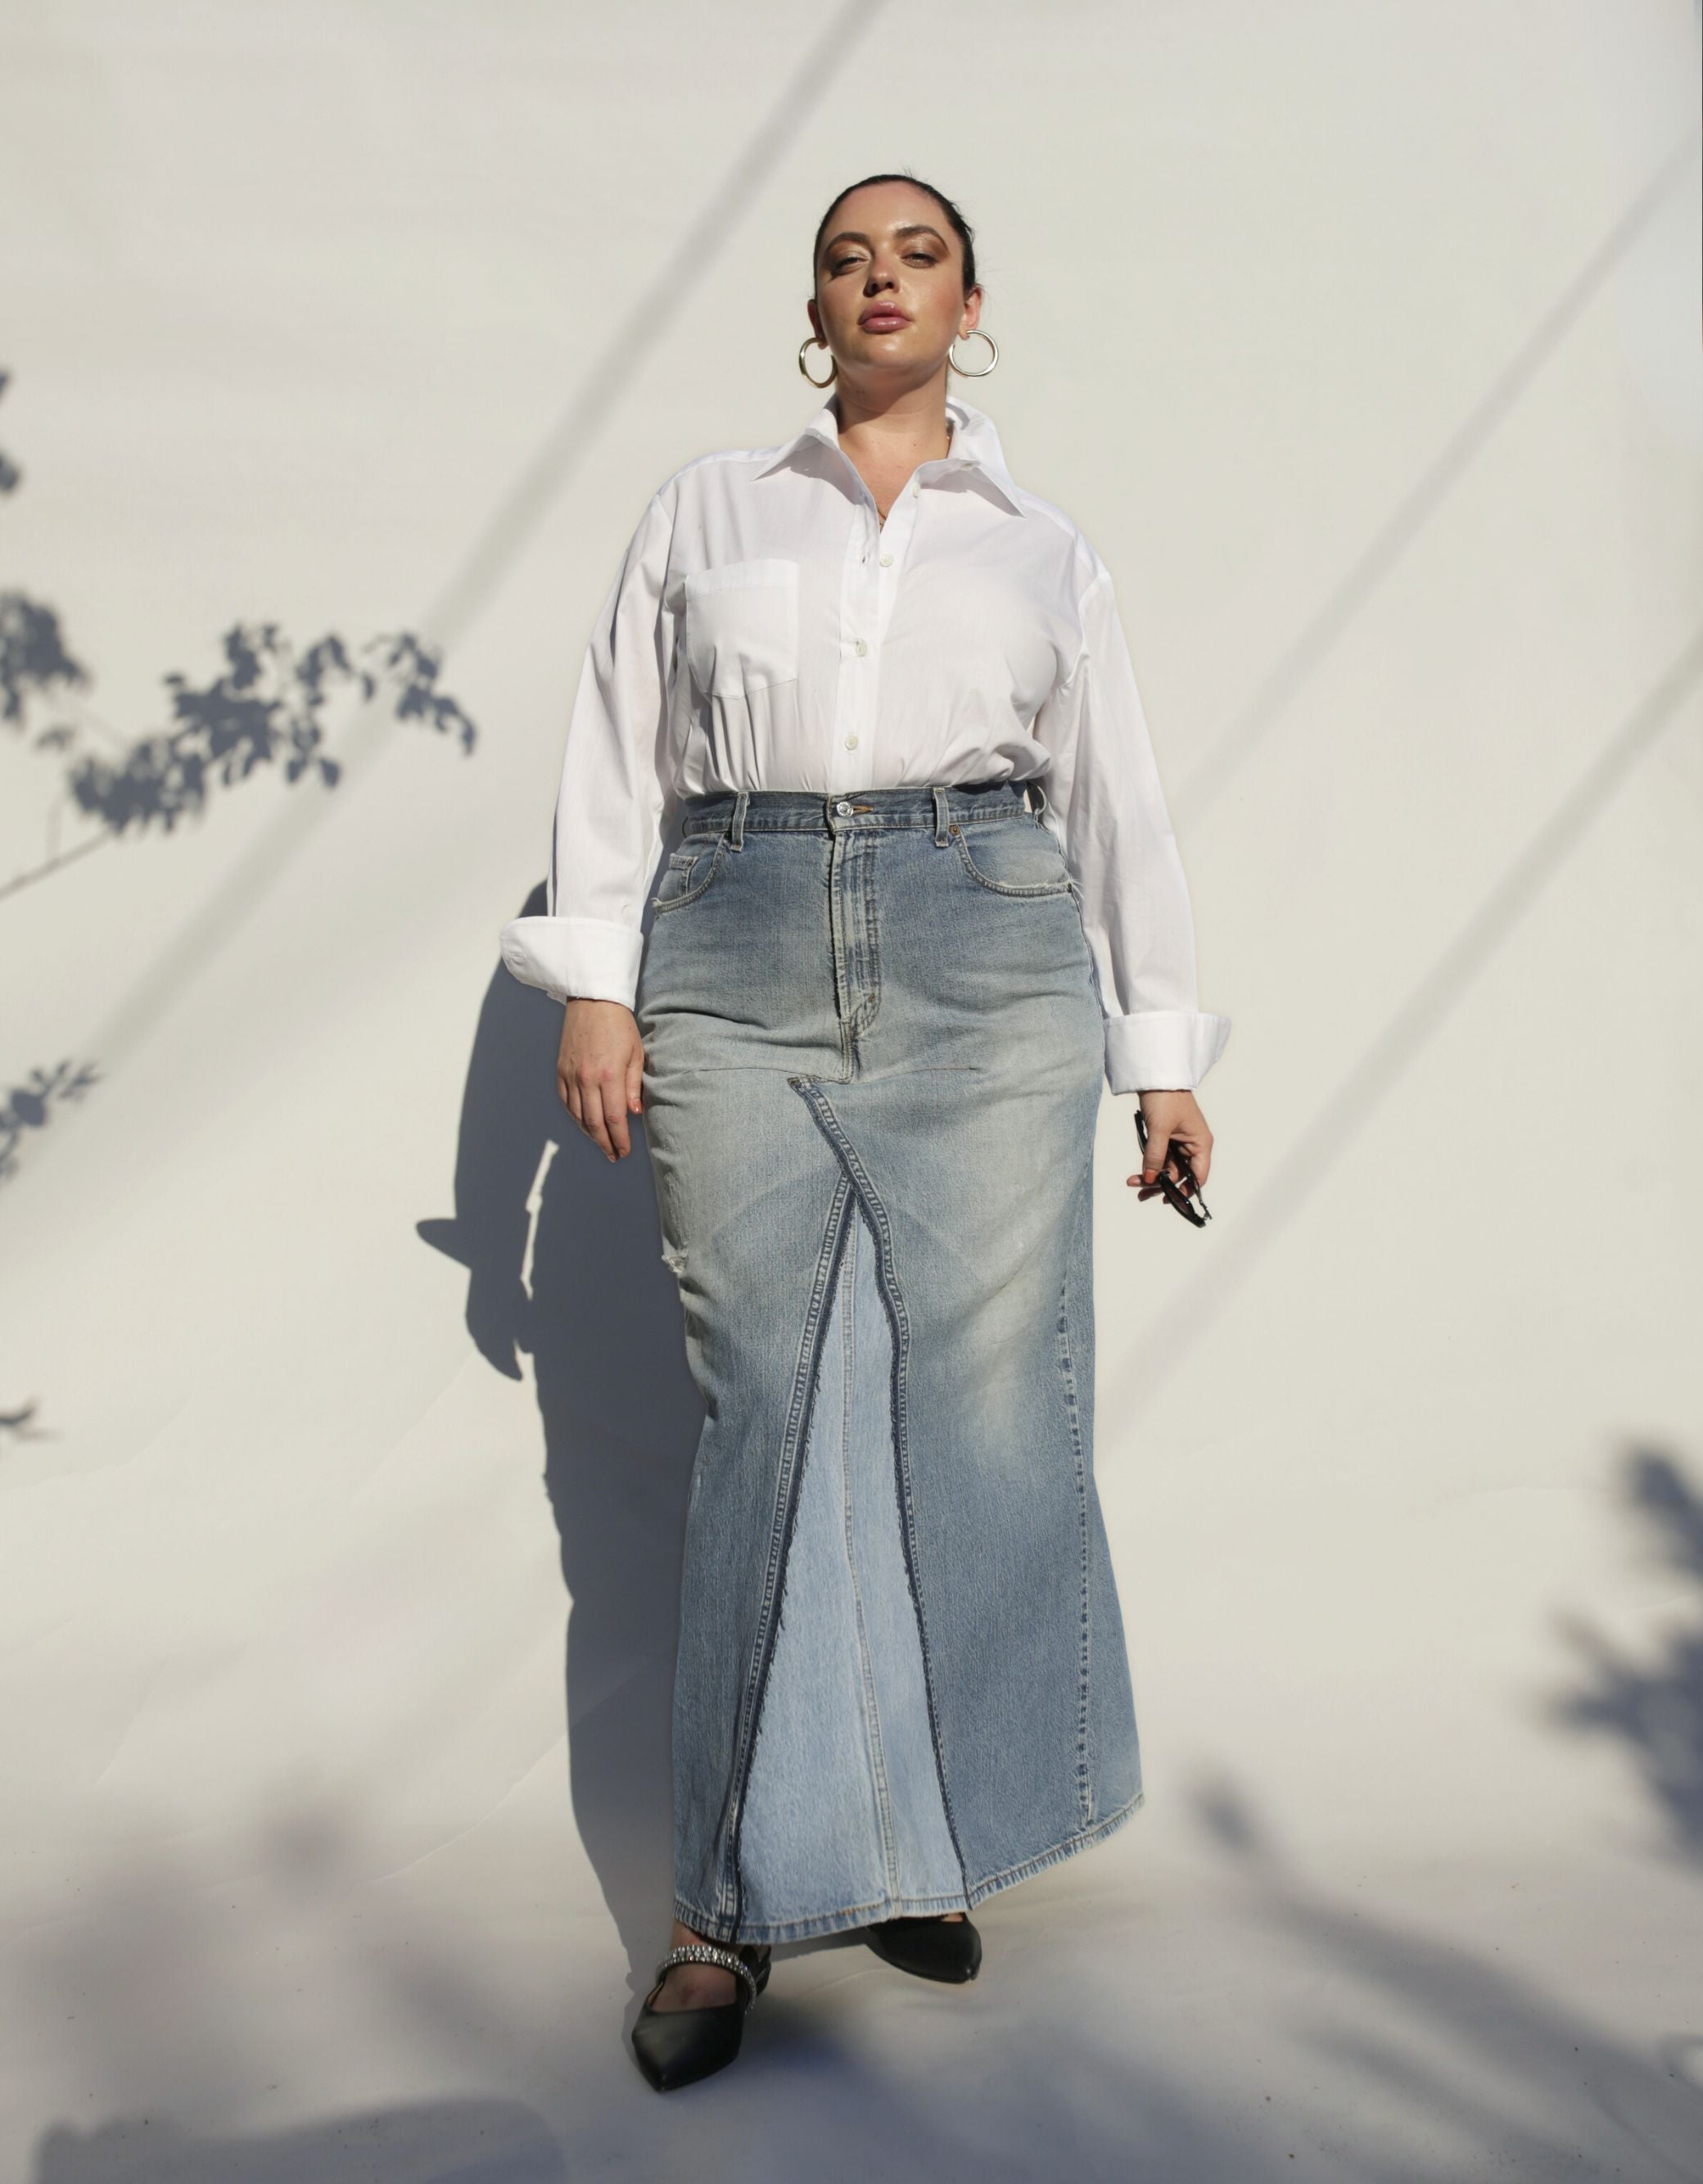 This Denim maxi is the ultimate in street smart style. Made with up-cycled jeans.  Every skirt is hand constructed from two pairs of jeans, making each piece unique and one of a kind.   Totally authentic and sustainable too. Designed to fit the "True Size Majority" sizes 10-22+.